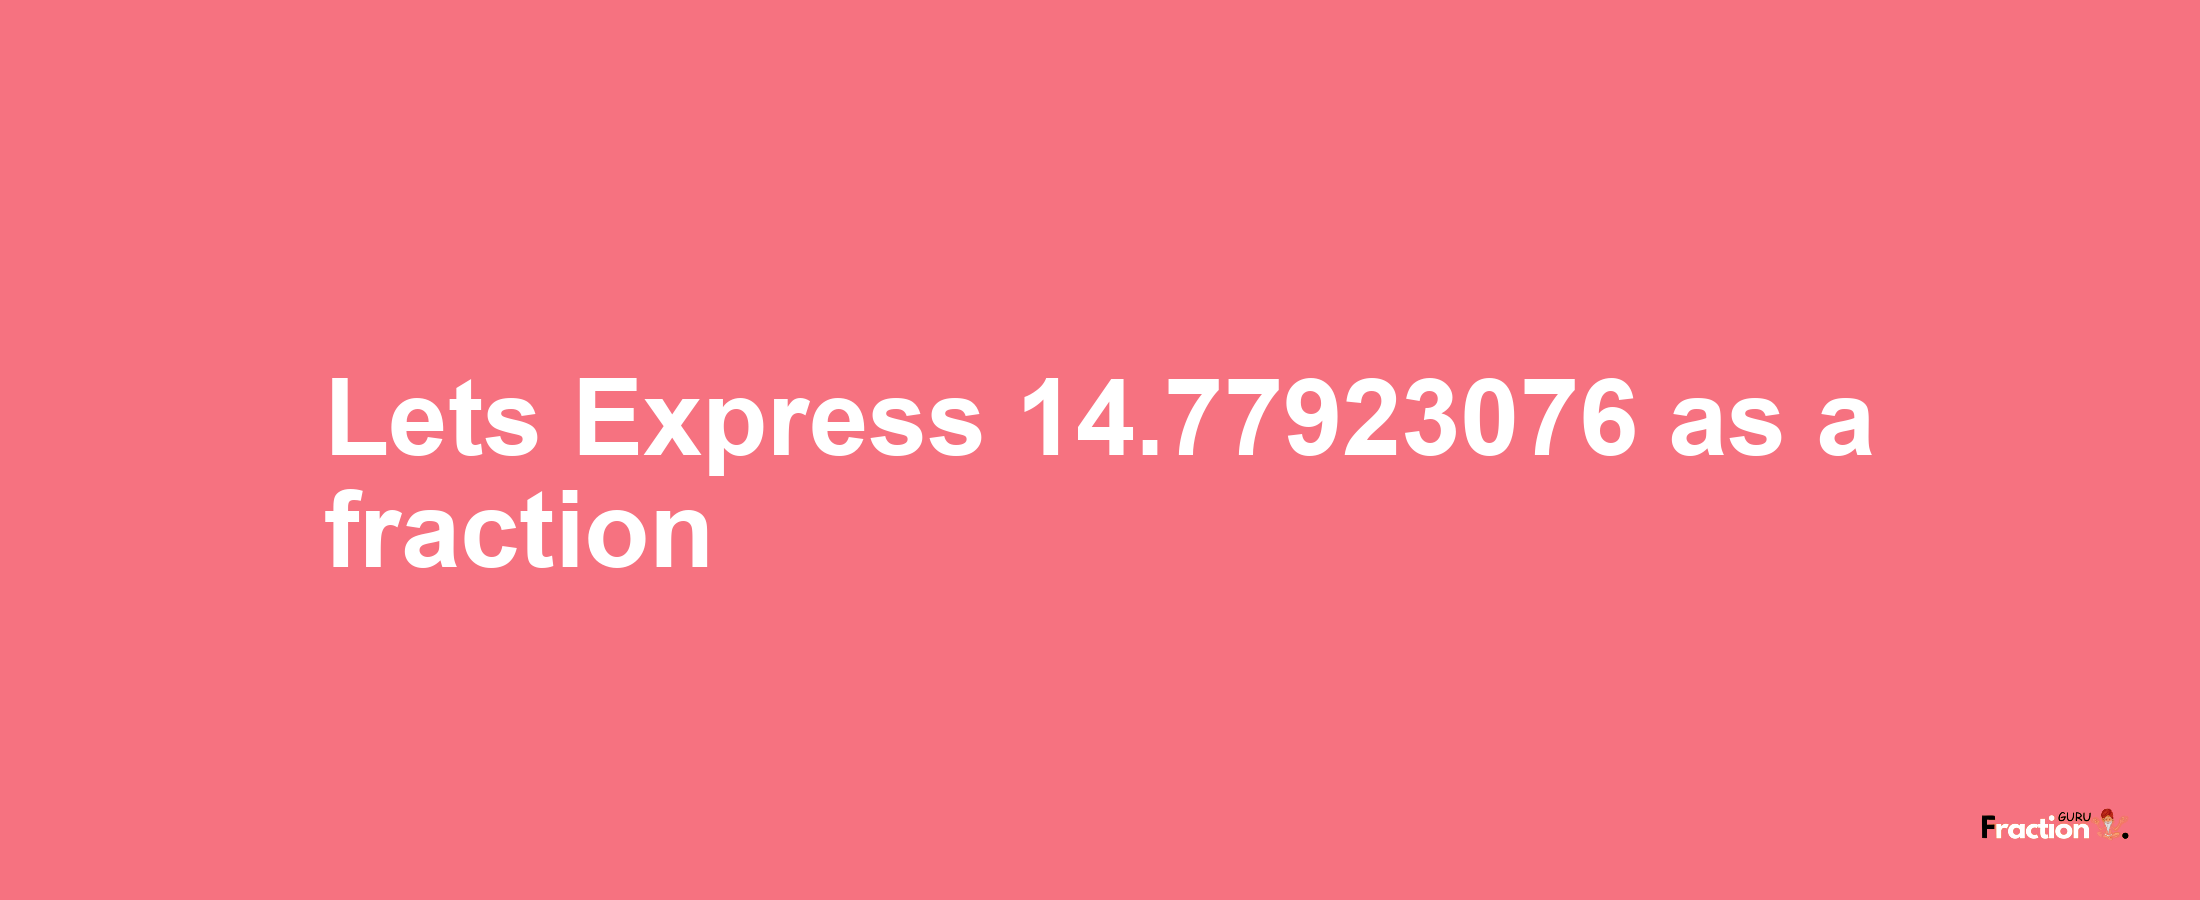 Lets Express 14.77923076 as afraction